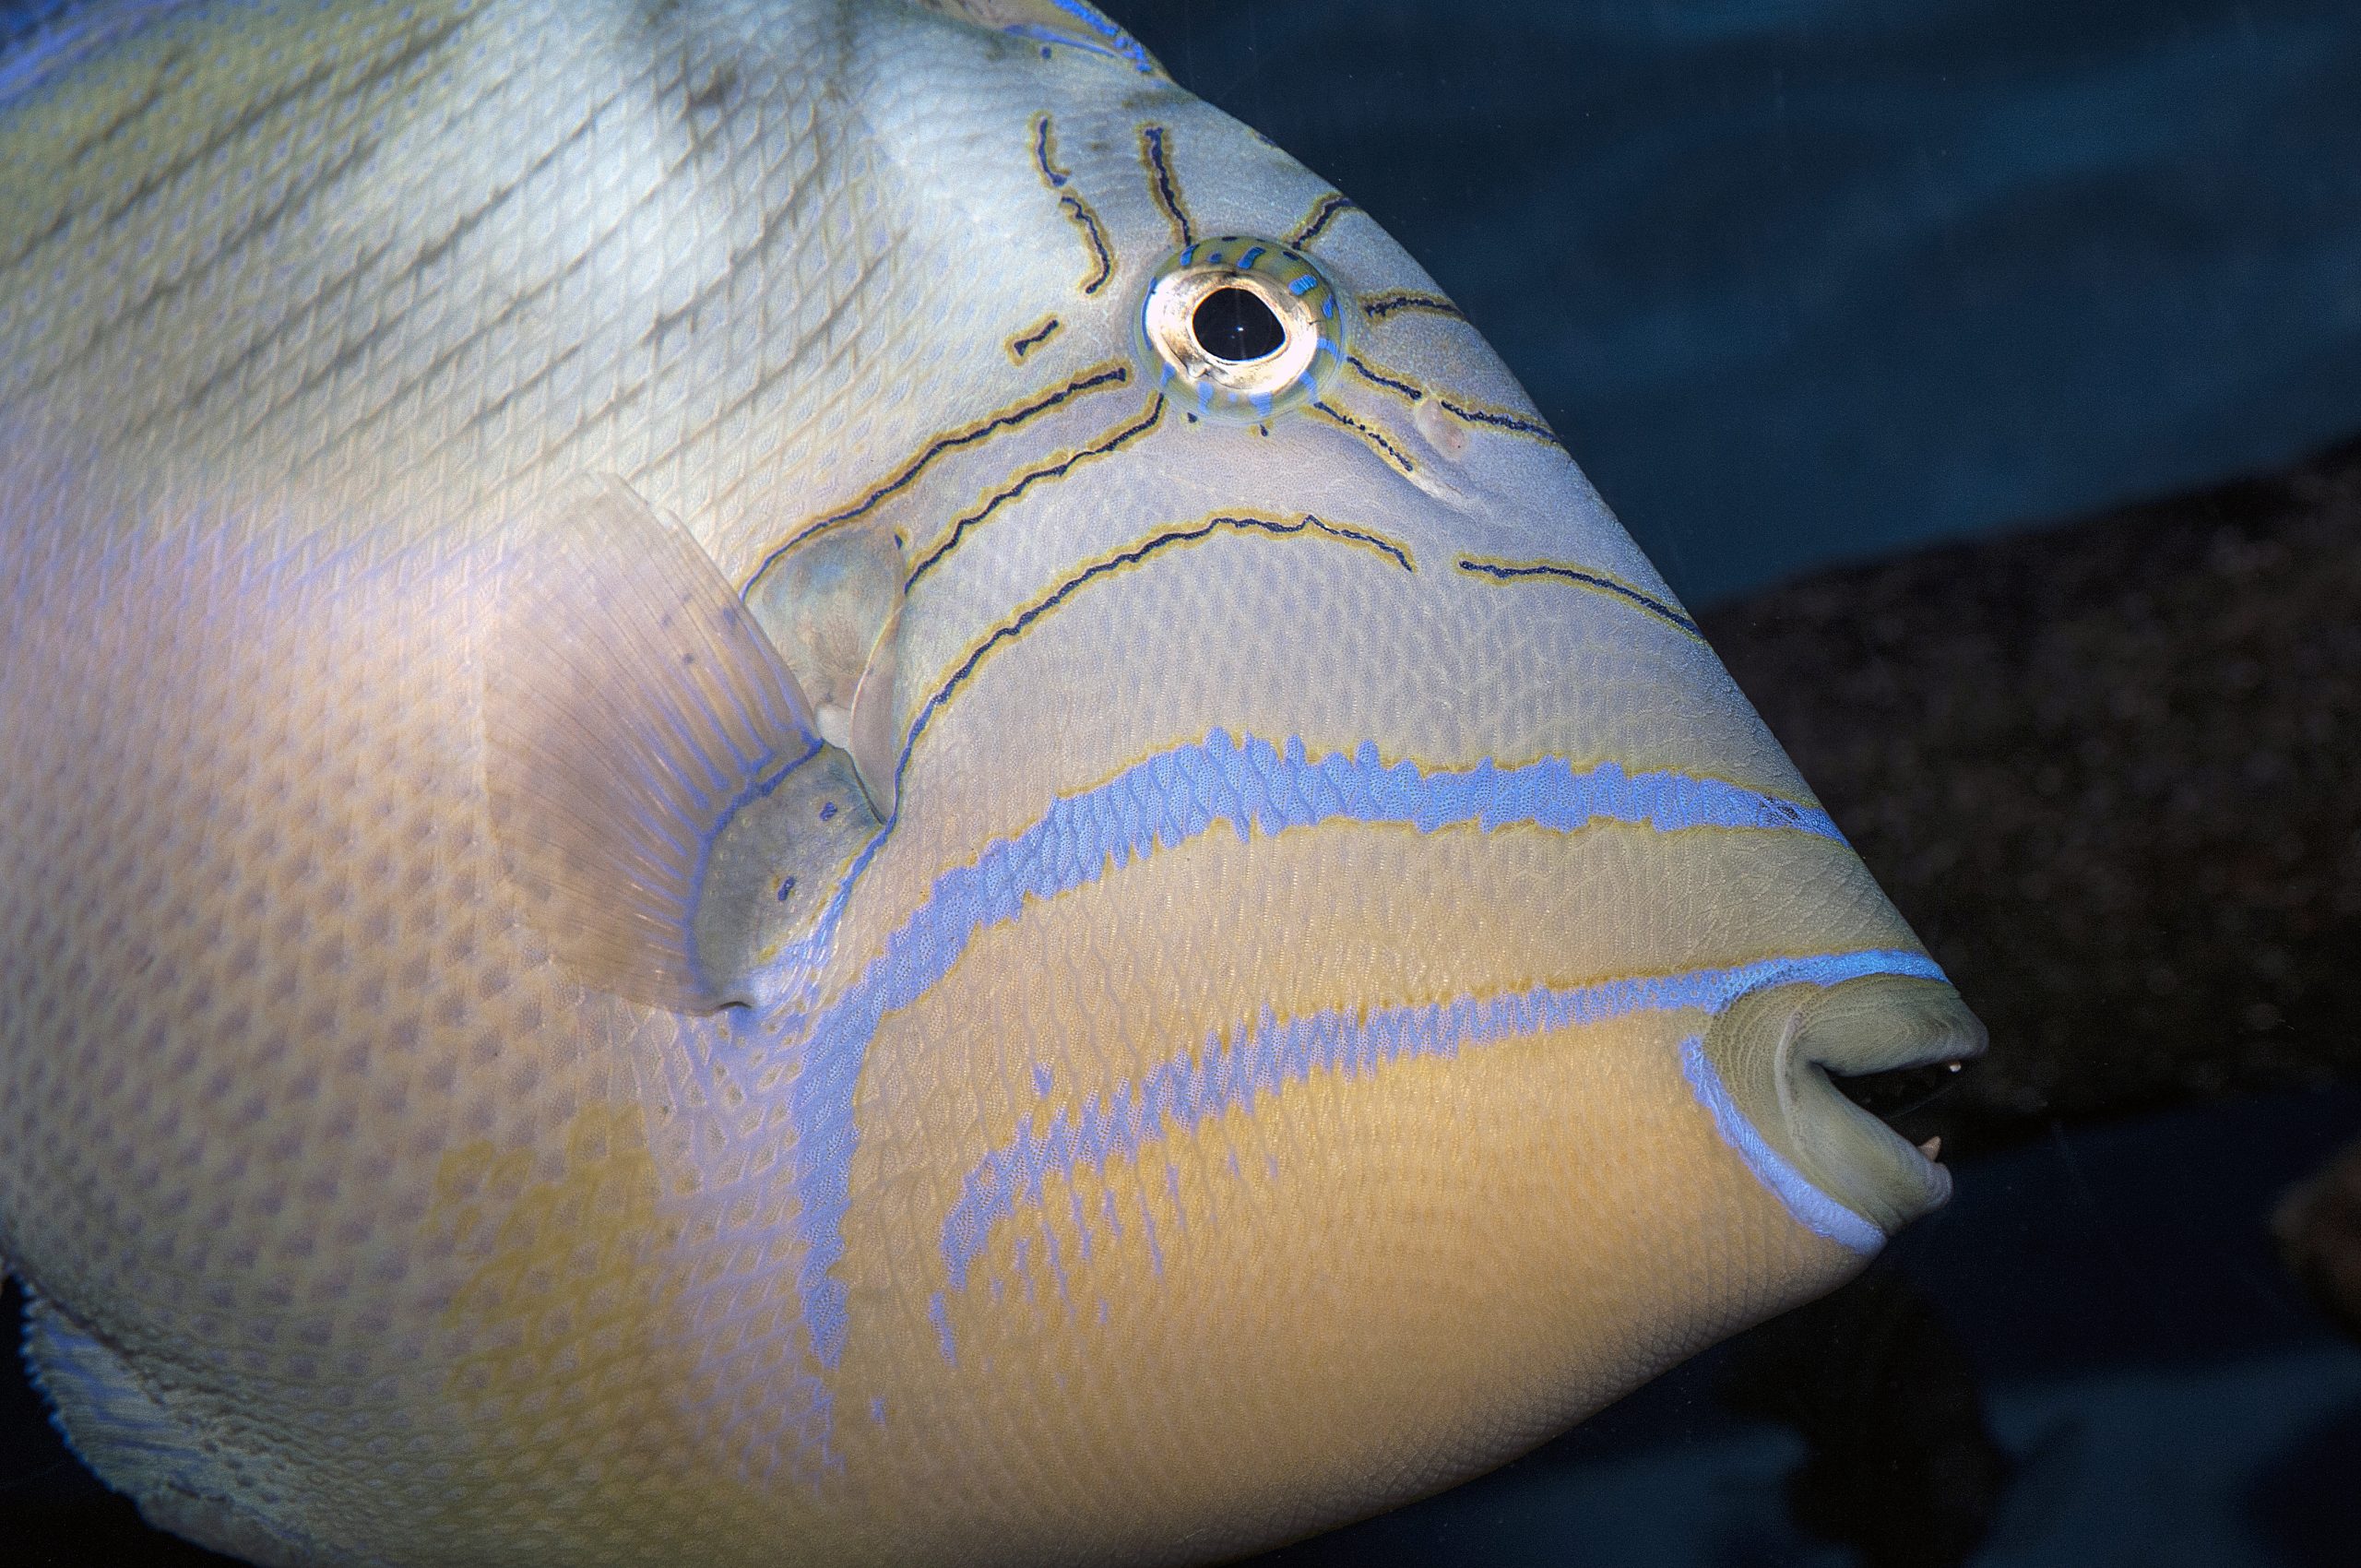 What's On the Line? Triggerfish